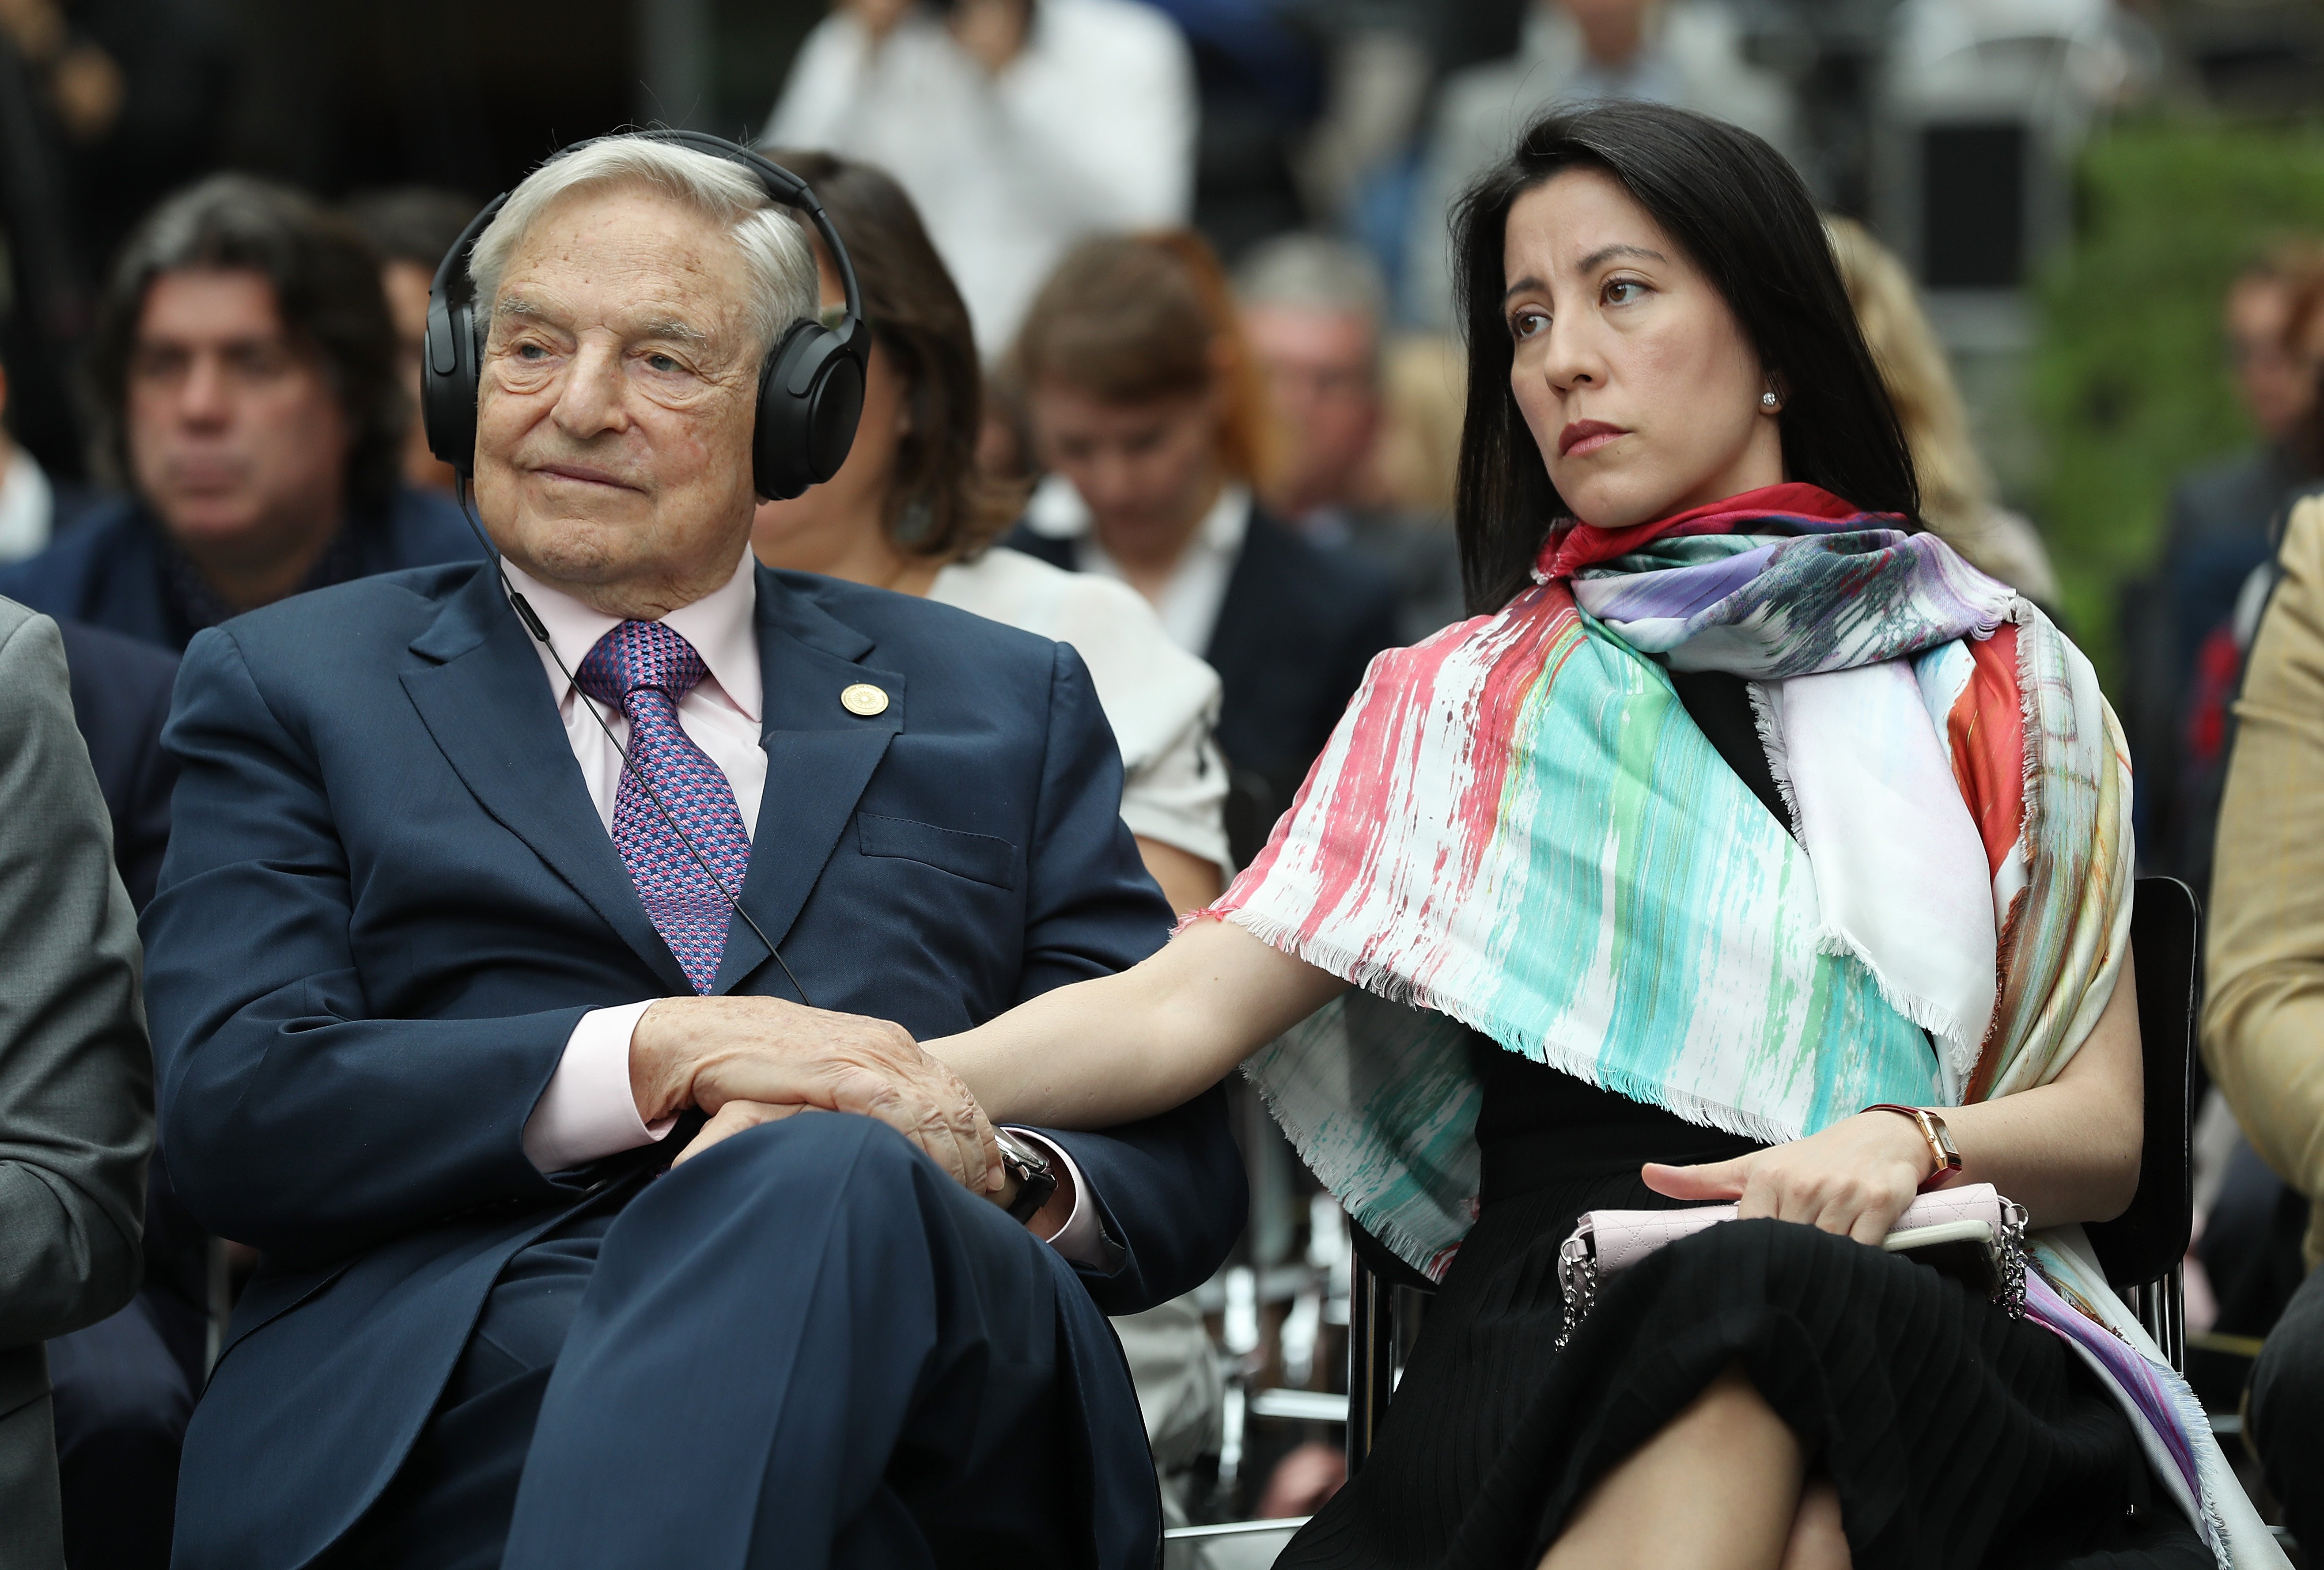 George Soros and Tamiko Bolton at the official opening of the European Roma Institute for Arts and Culture (ERIAC) on June 8, 2017, in Berlin, Germany. | Source: Getty Images